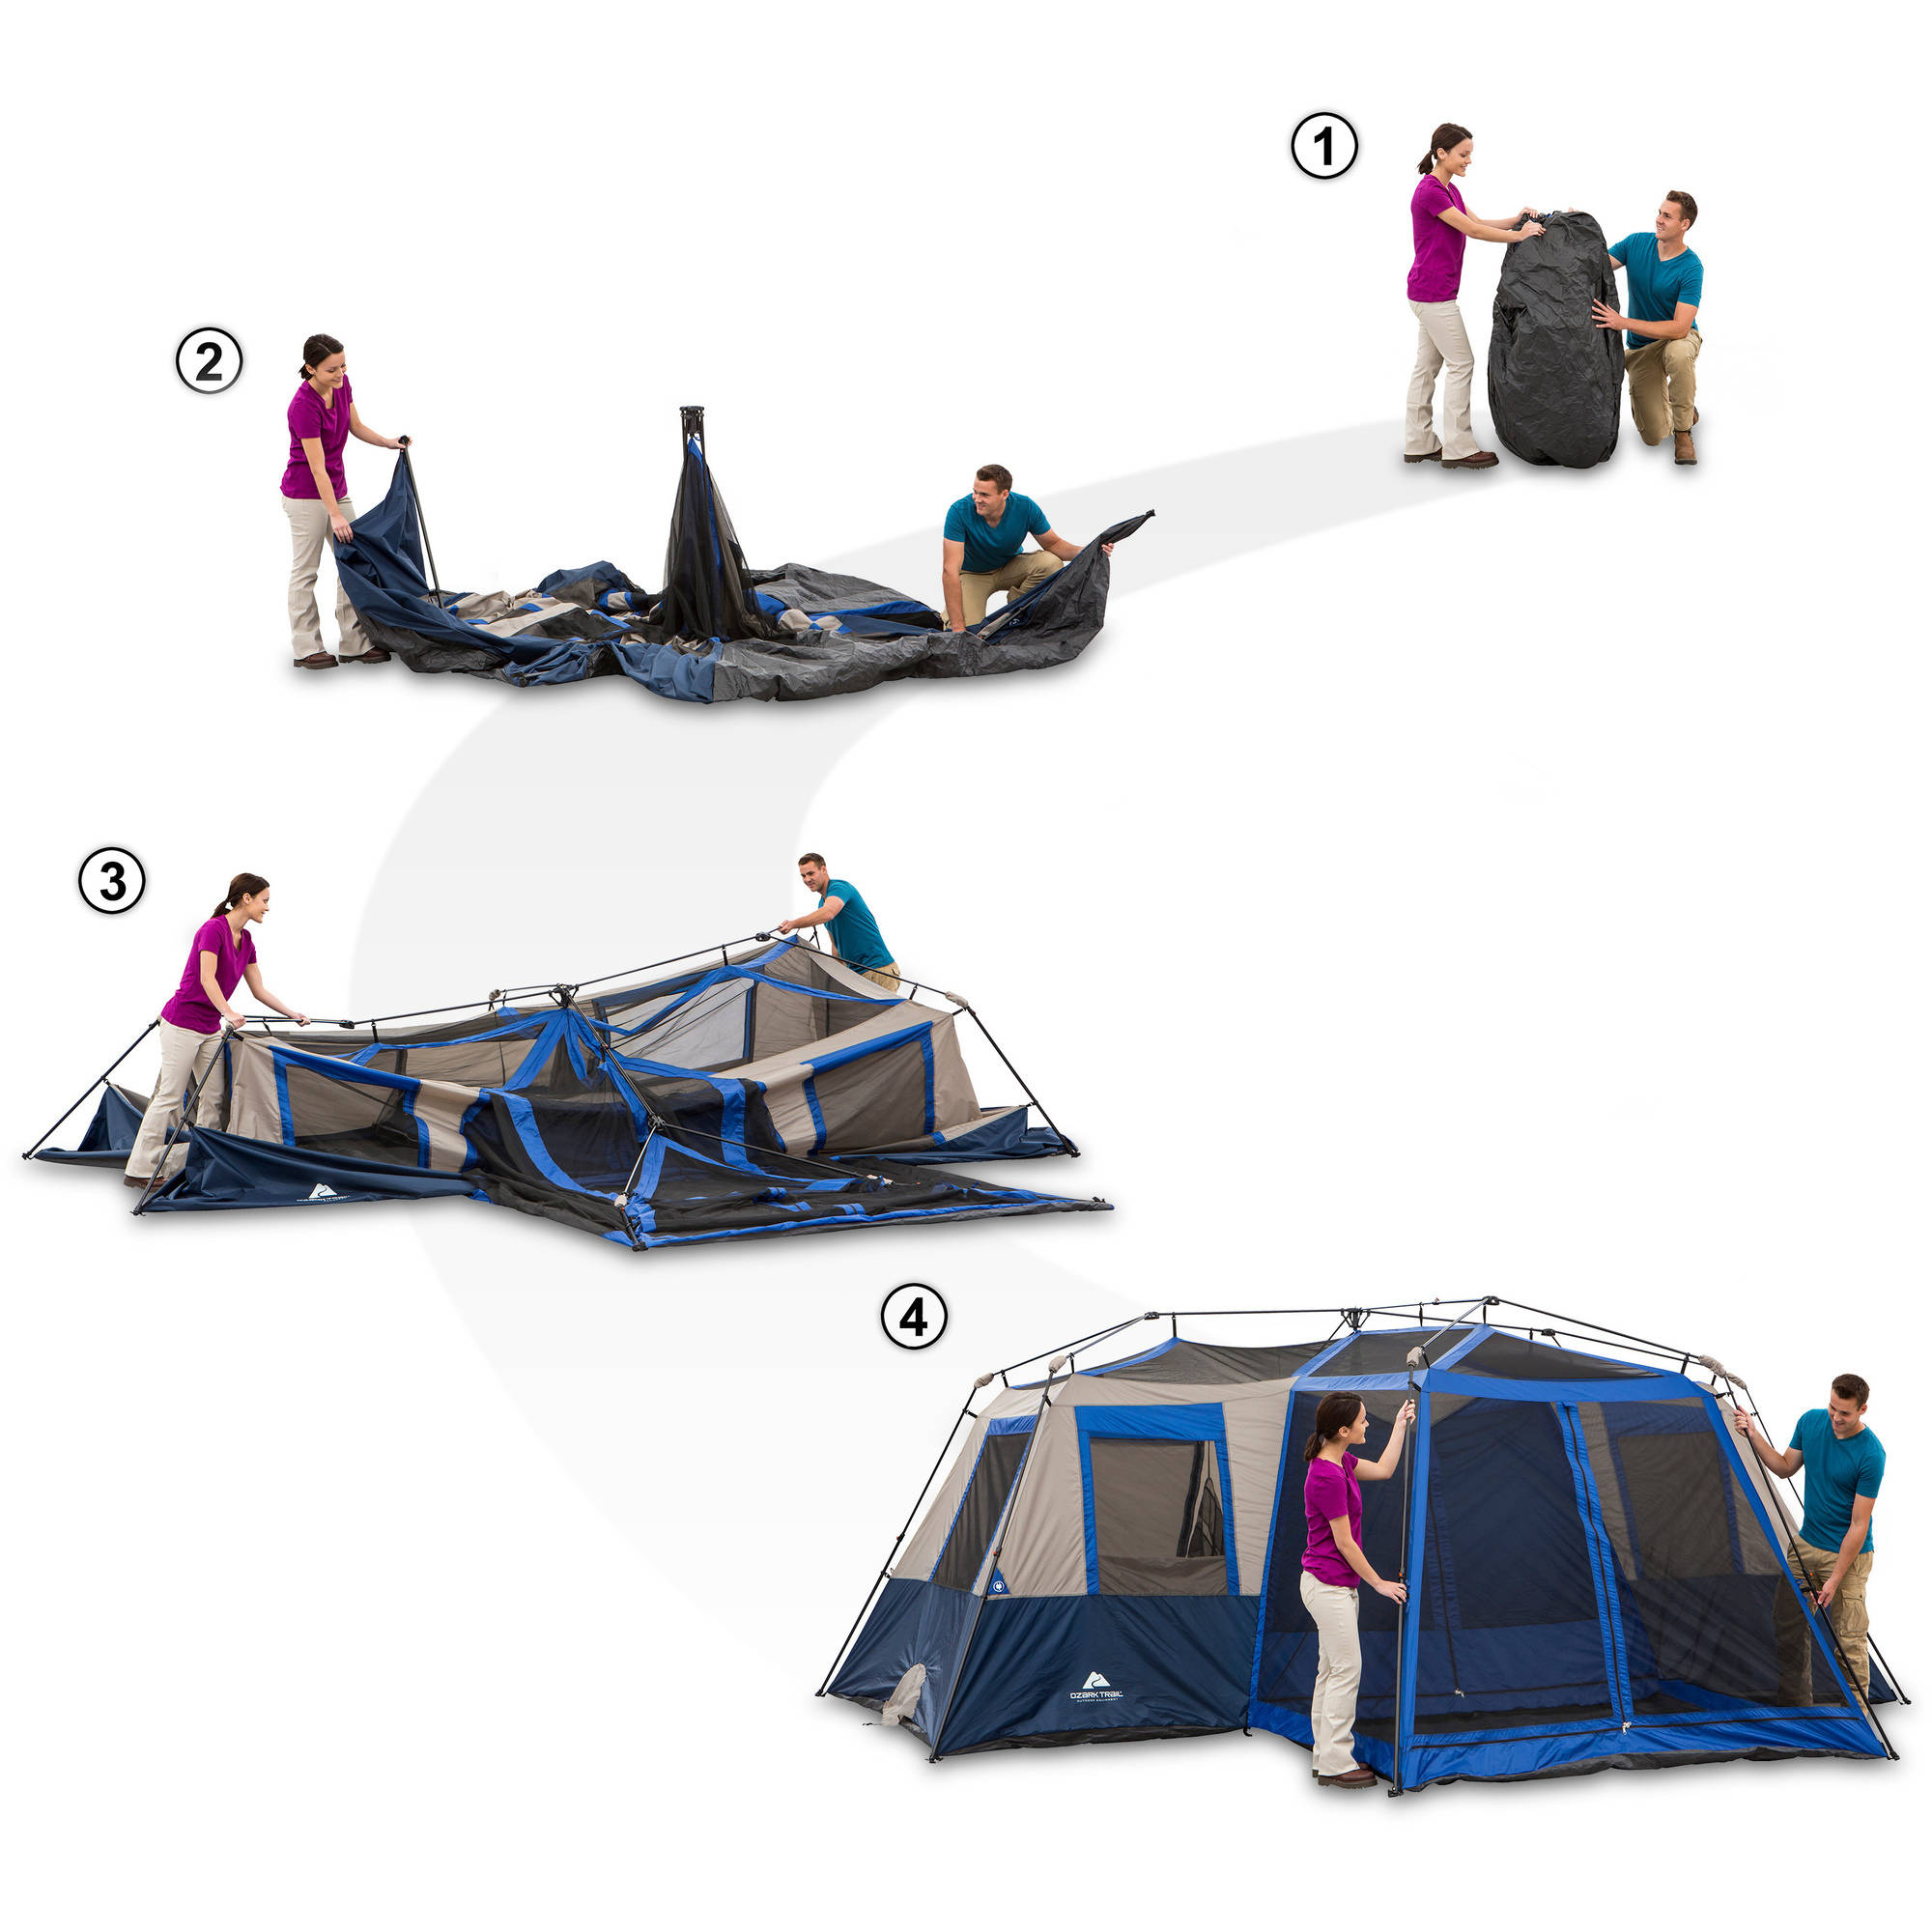 Ozark Trail 12 Person 2 Room Instant Cabin Tent with Screen Room - image 3 of 10